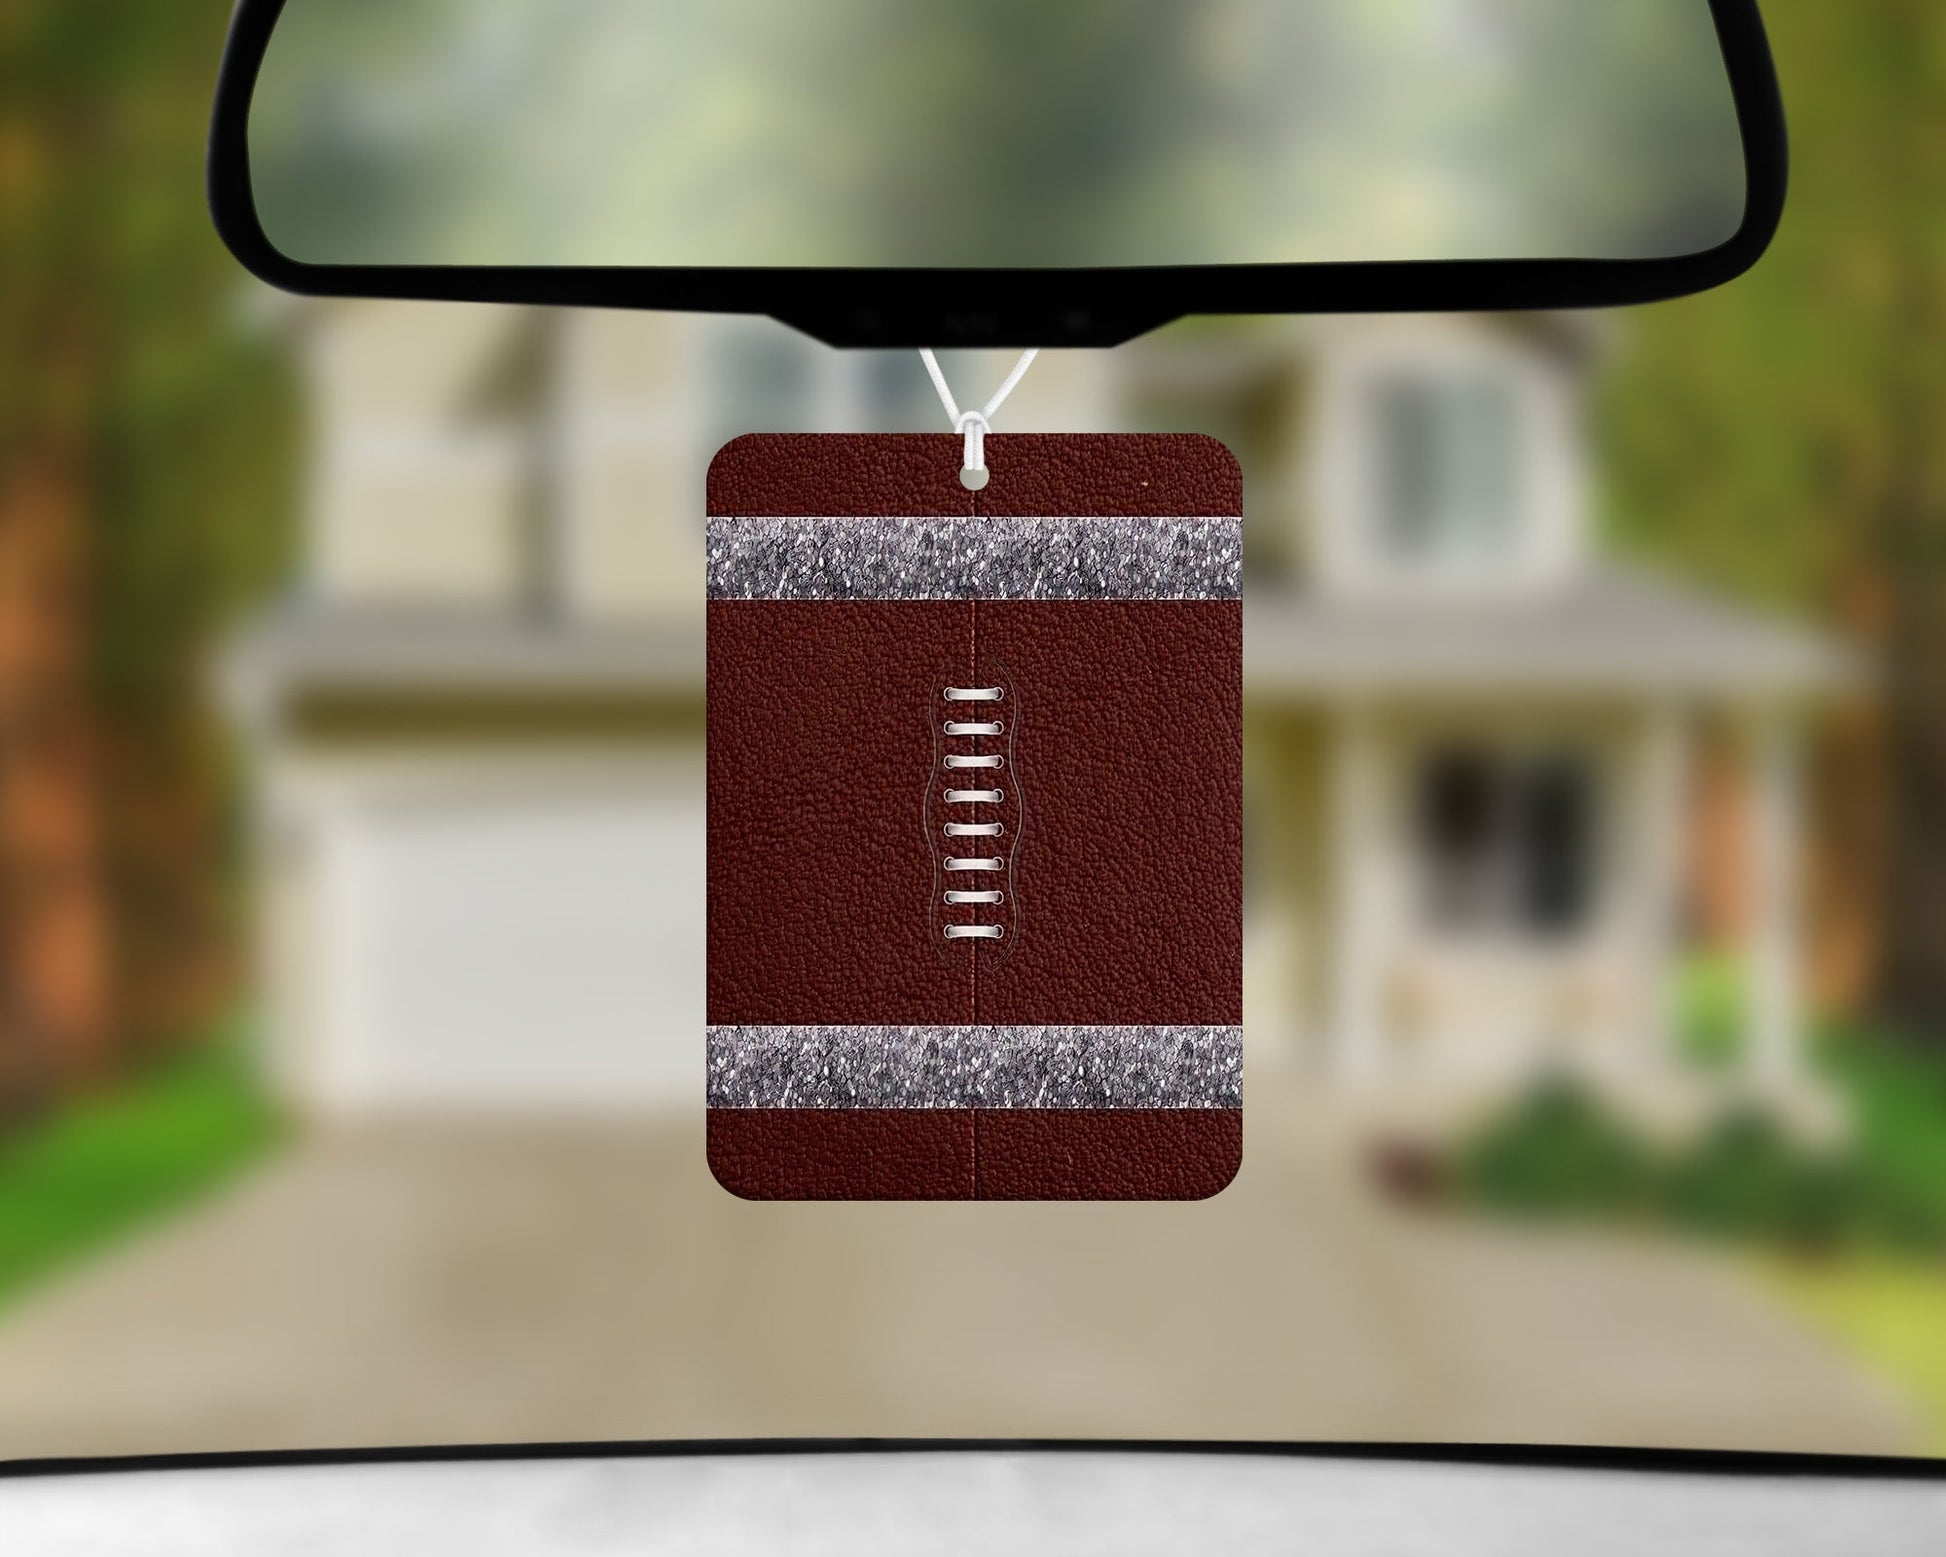 Football|Freshie|Includes Scent Bottle - Vehicle Air Freshener